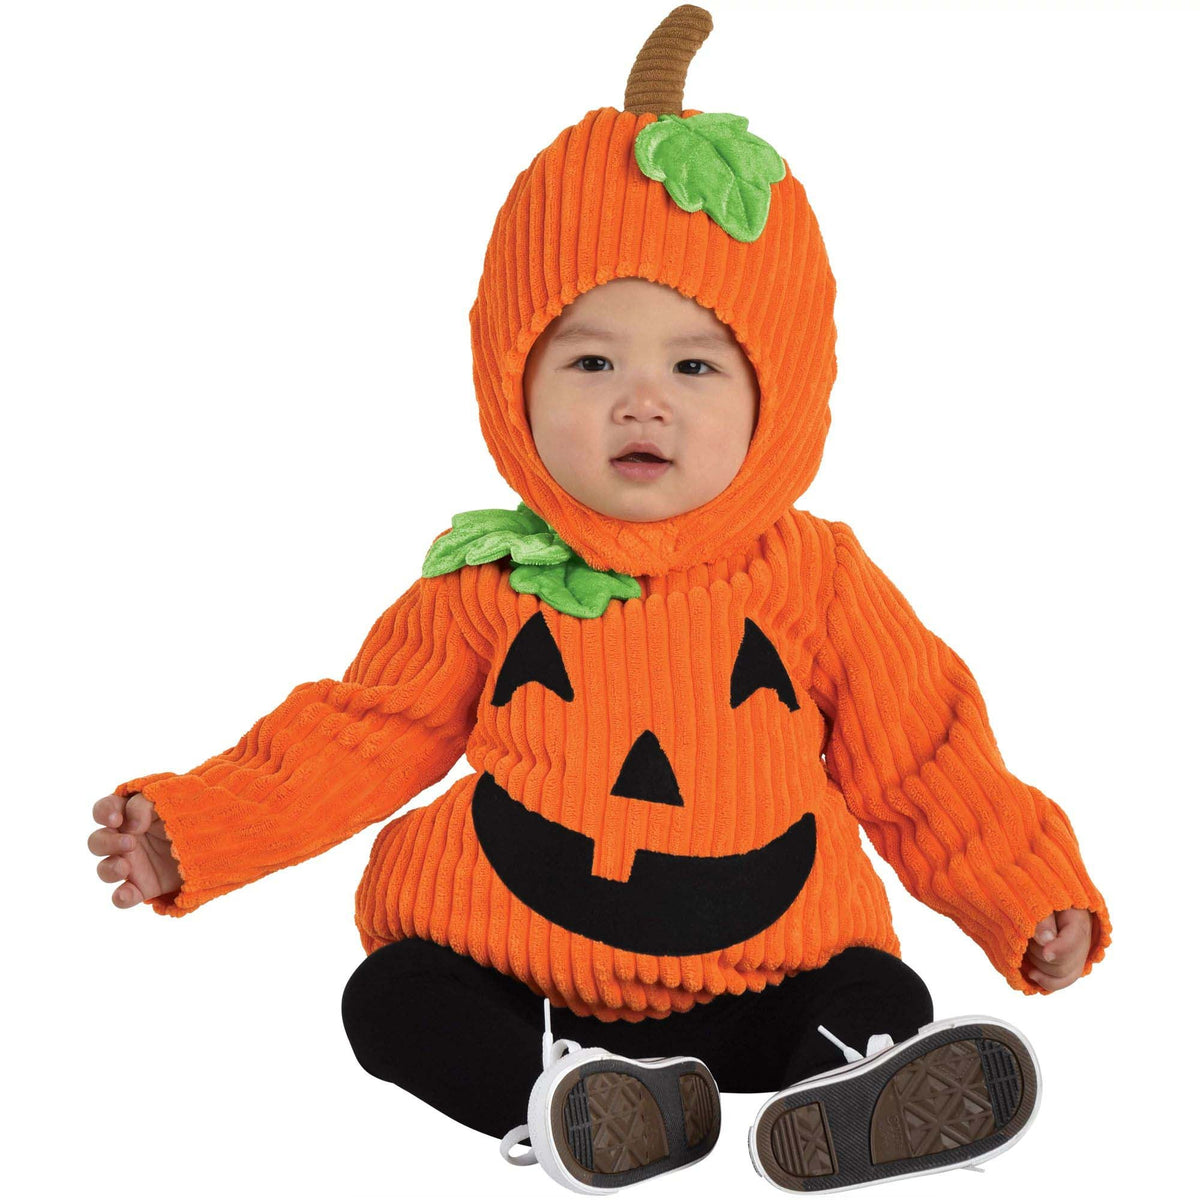 HALLOWEEN COSTUME CO. Costumes Pumpkin Patch Cutie Costume for Babies and Toddlers, Orange Tunic